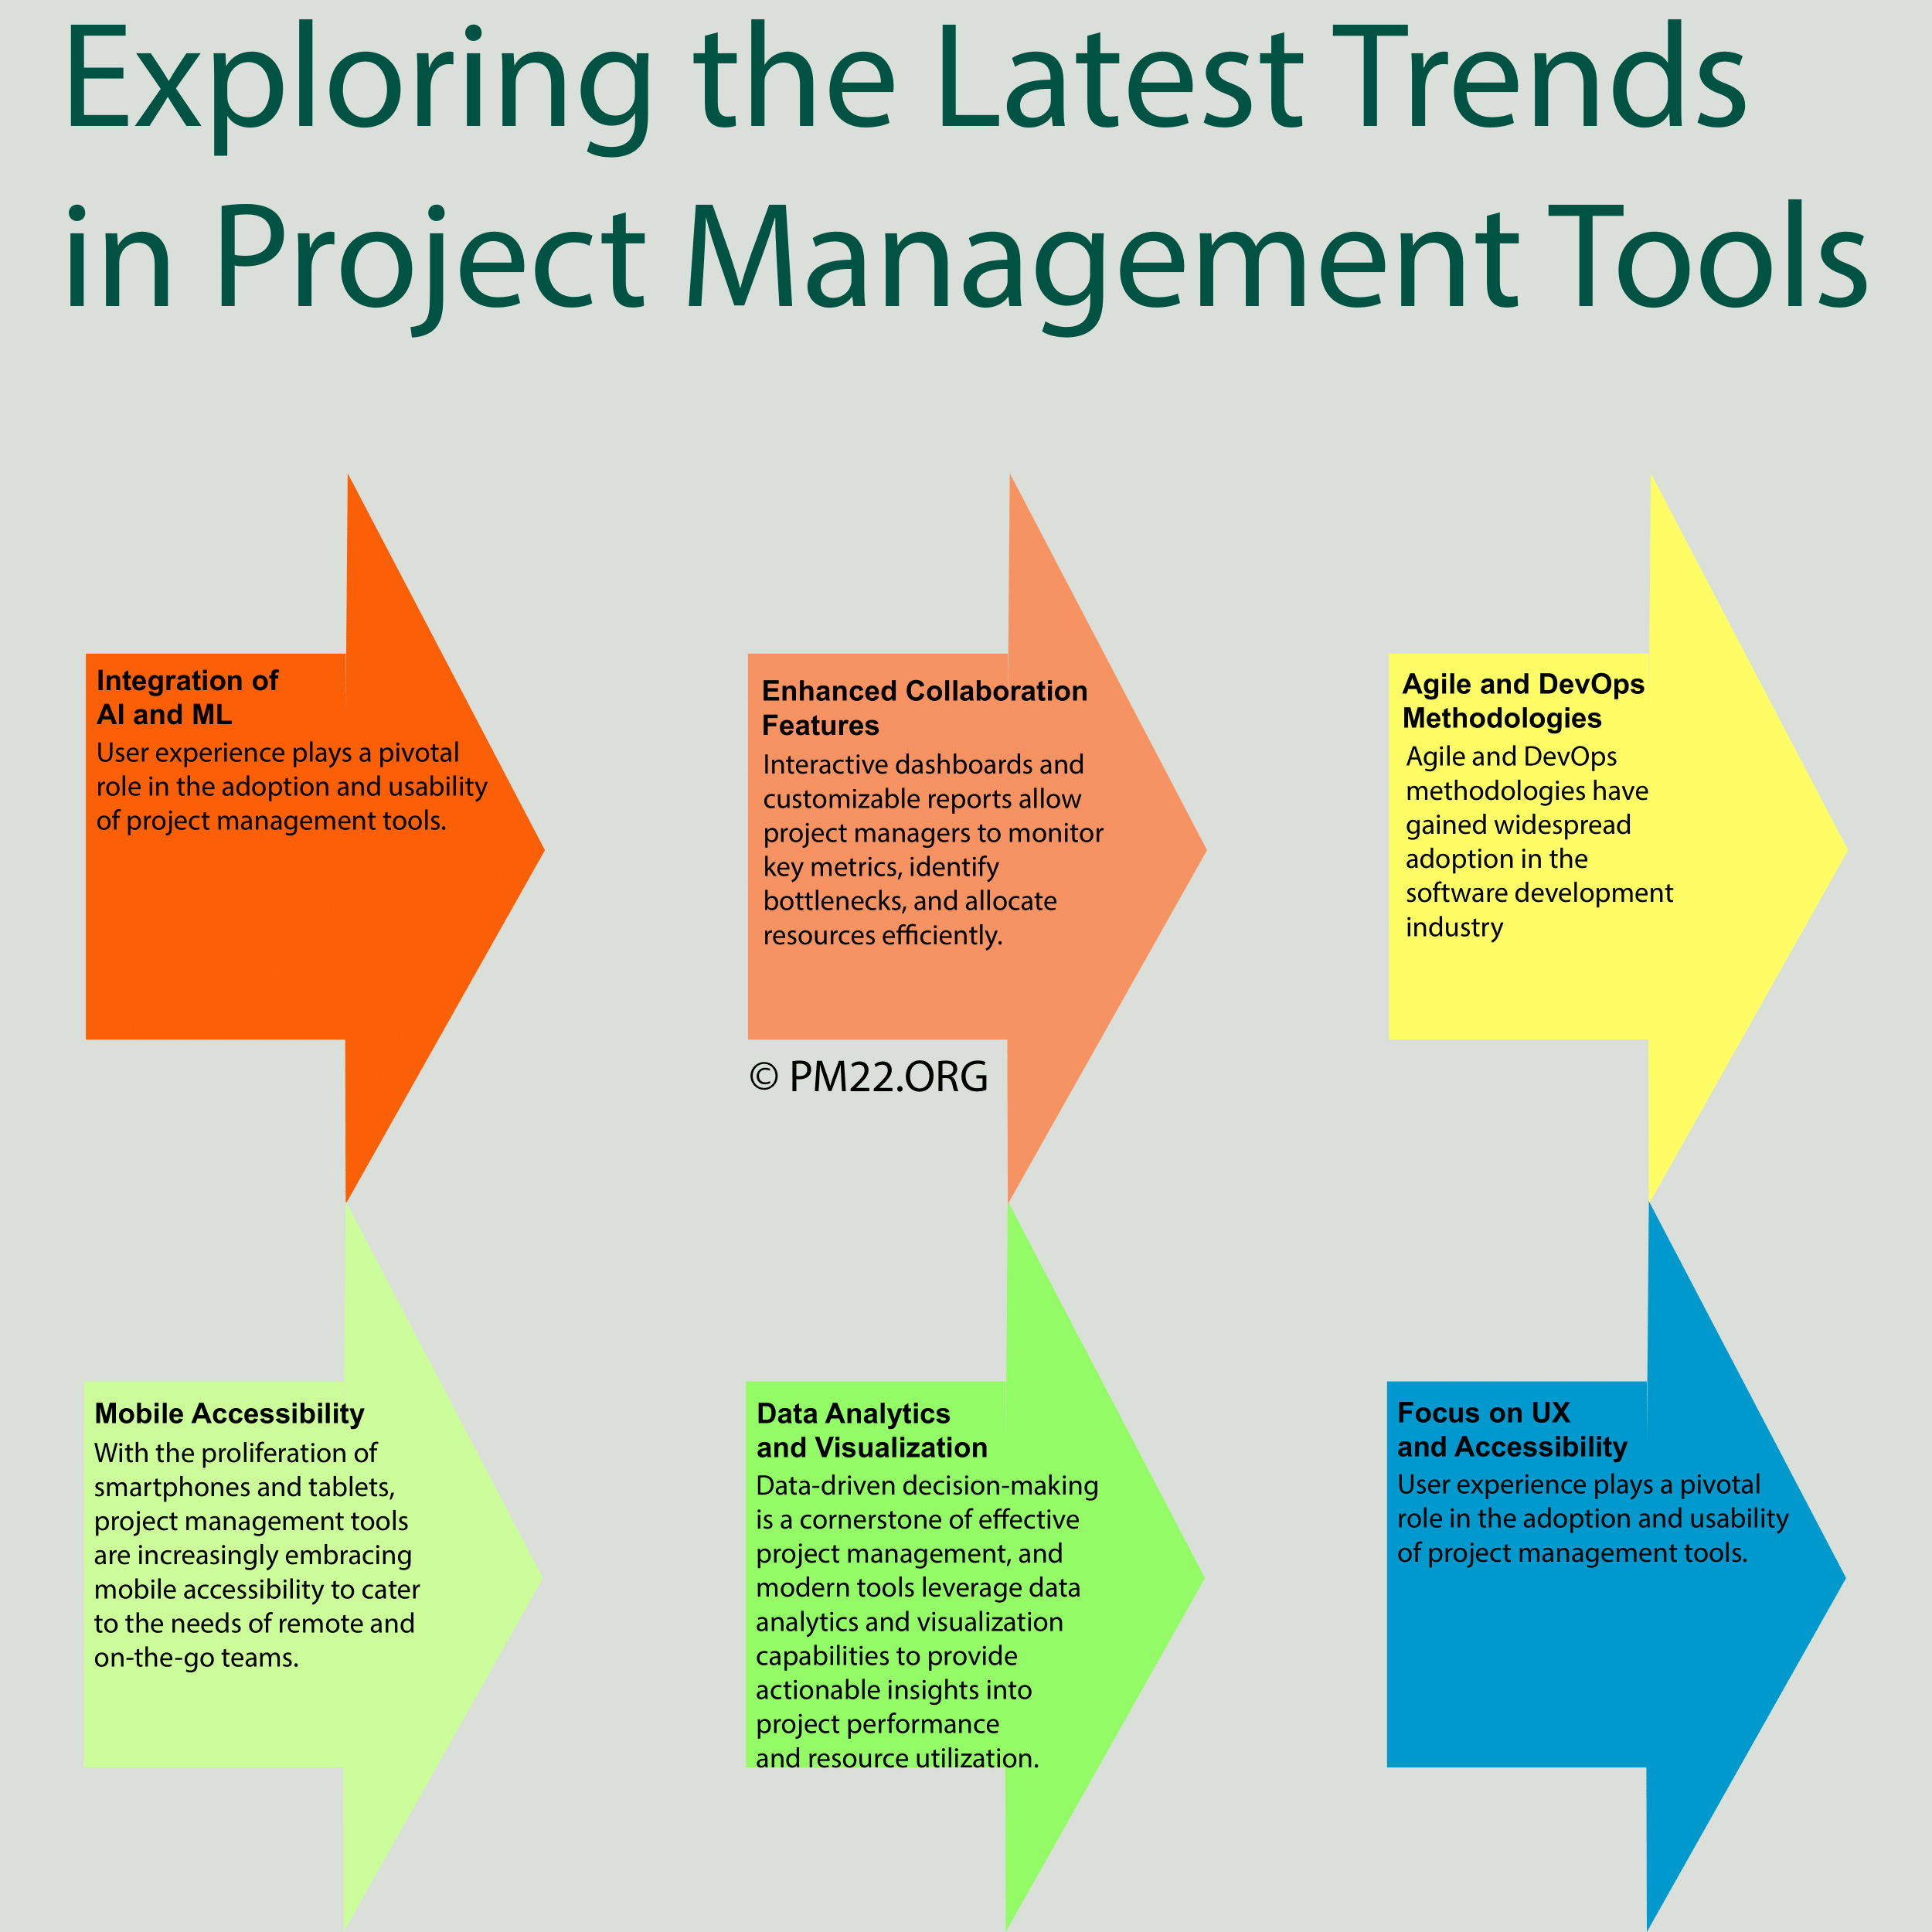 Exploring the Latest Trends in Project Management Tools